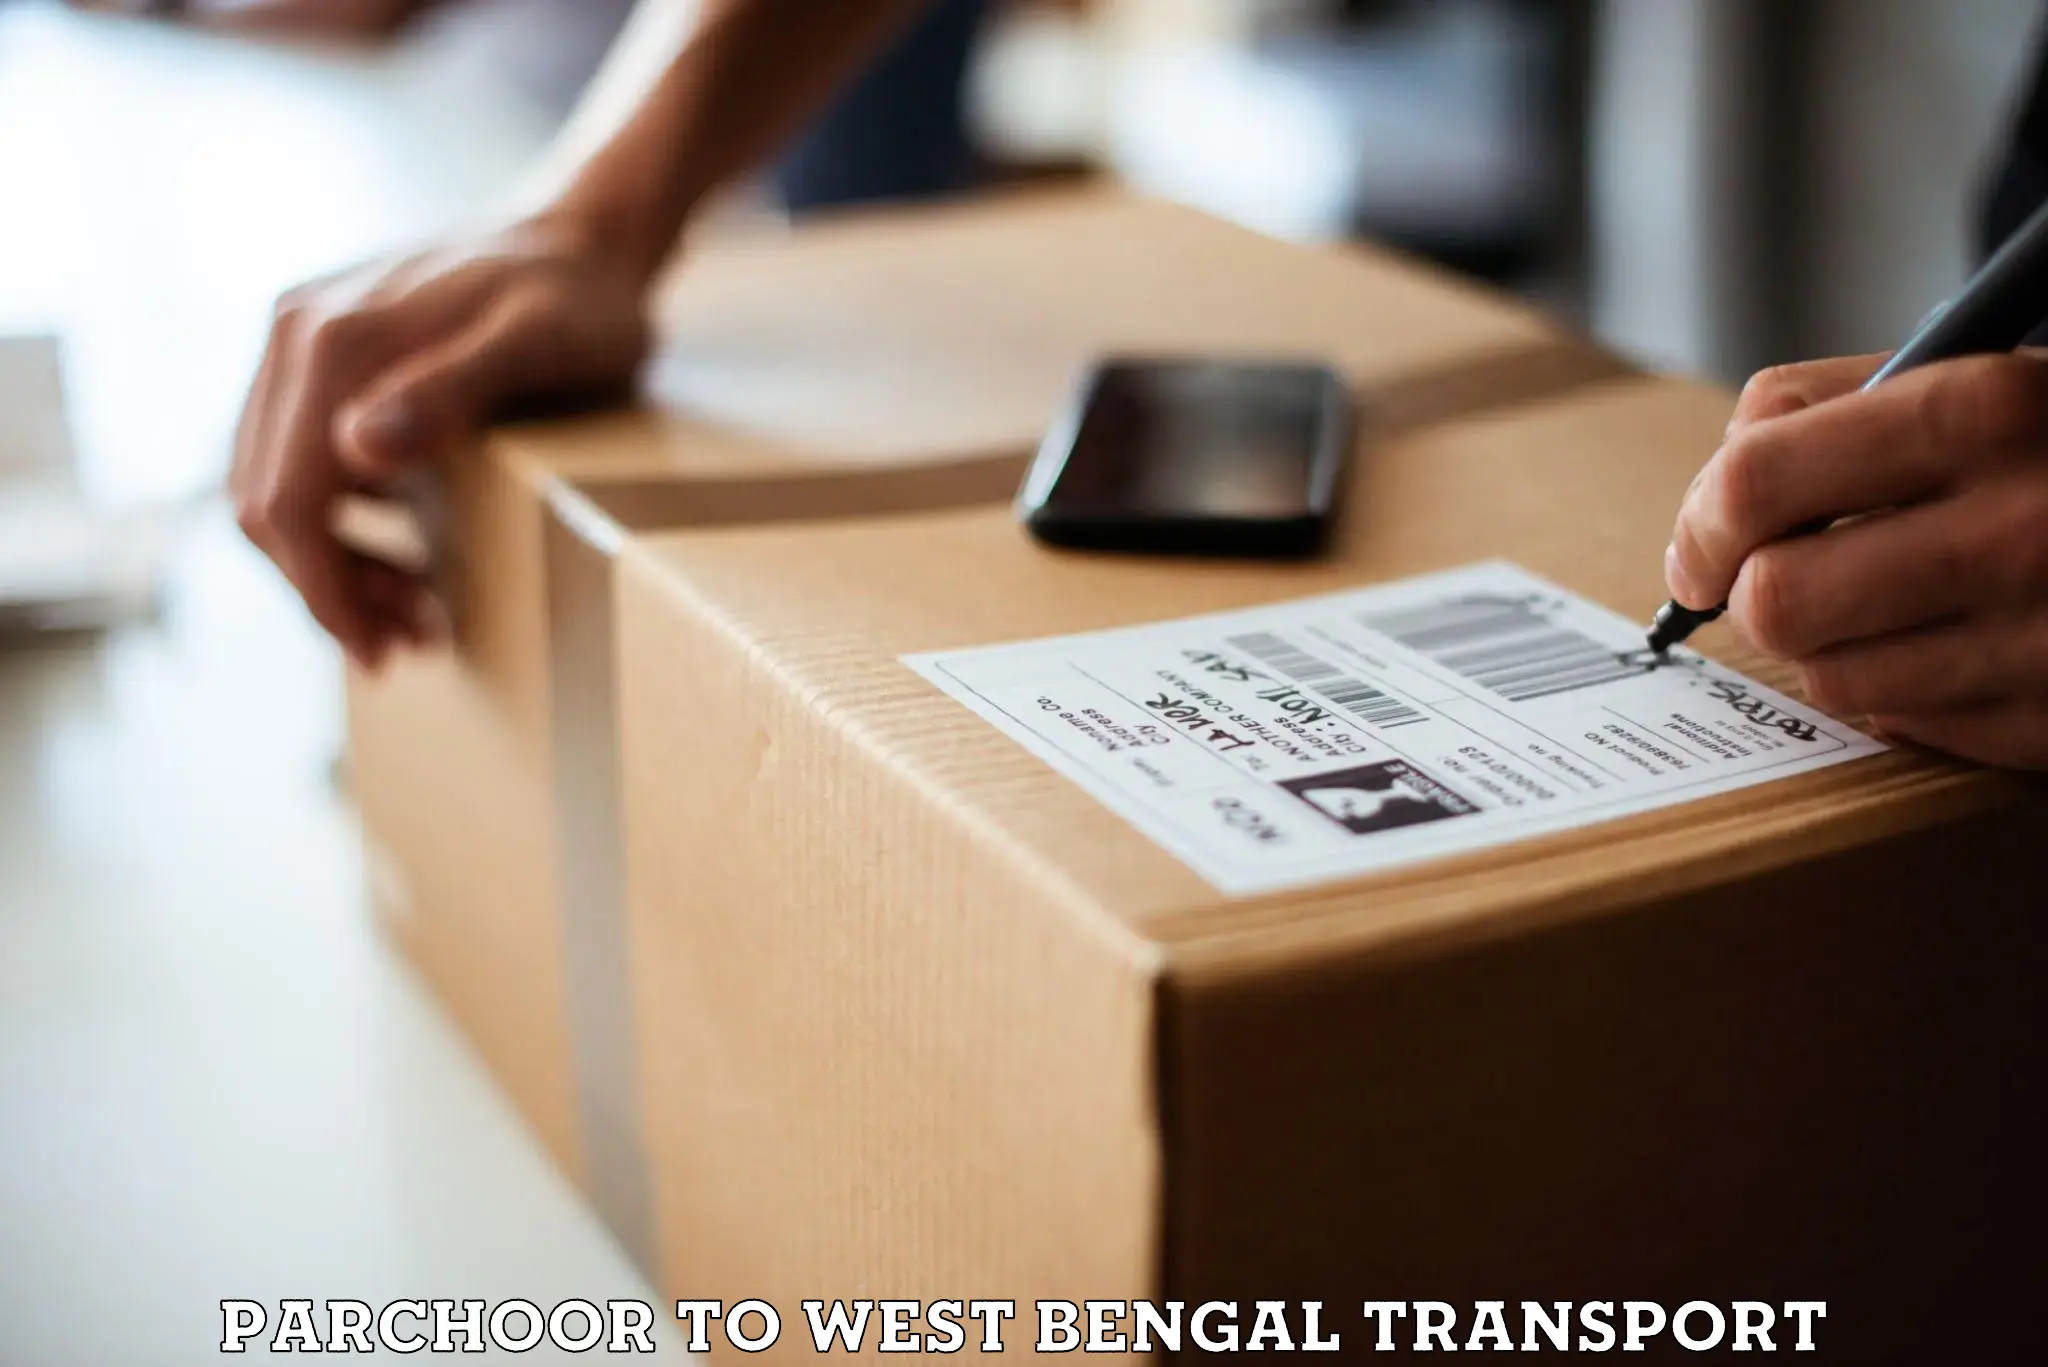 Daily transport service Parchoor to West Bengal